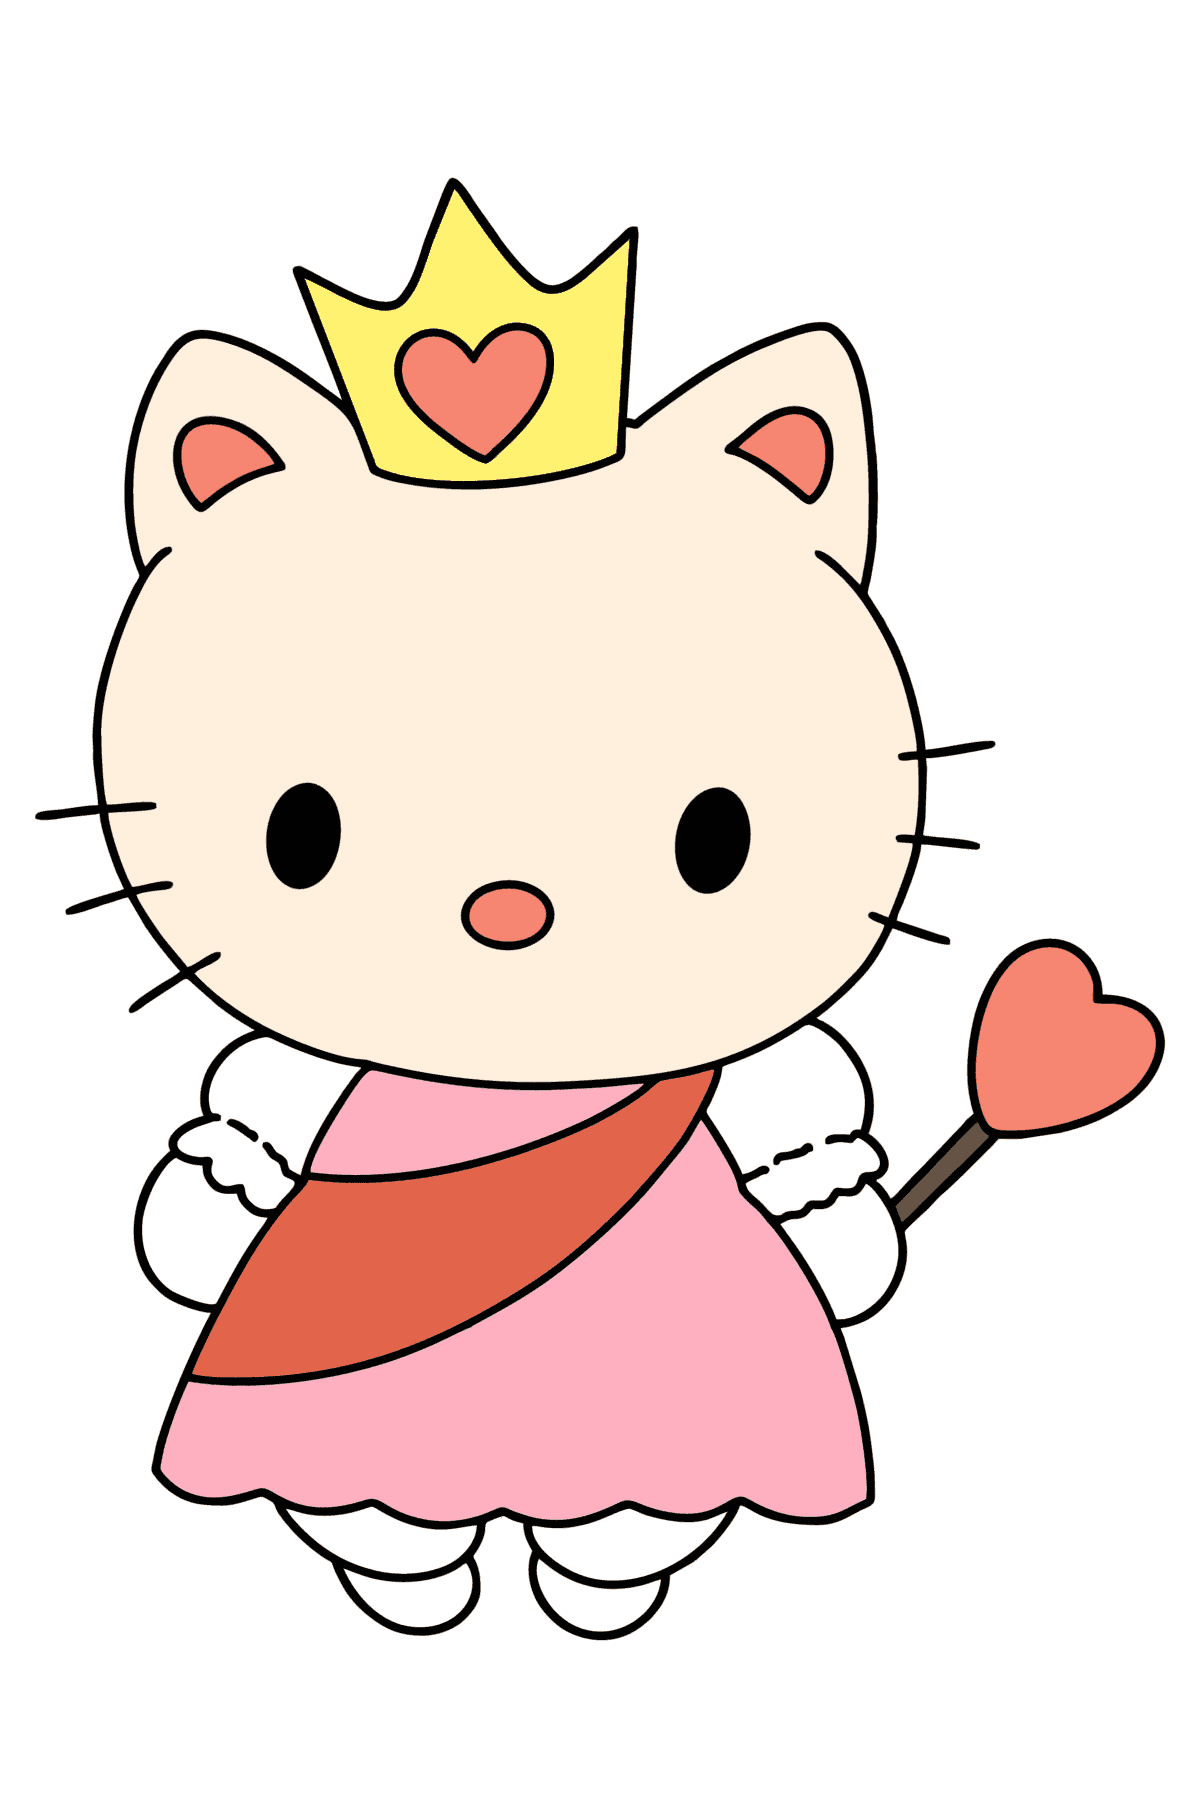 Hello Kitty Princess coloring page - Coloring Pages for Kids